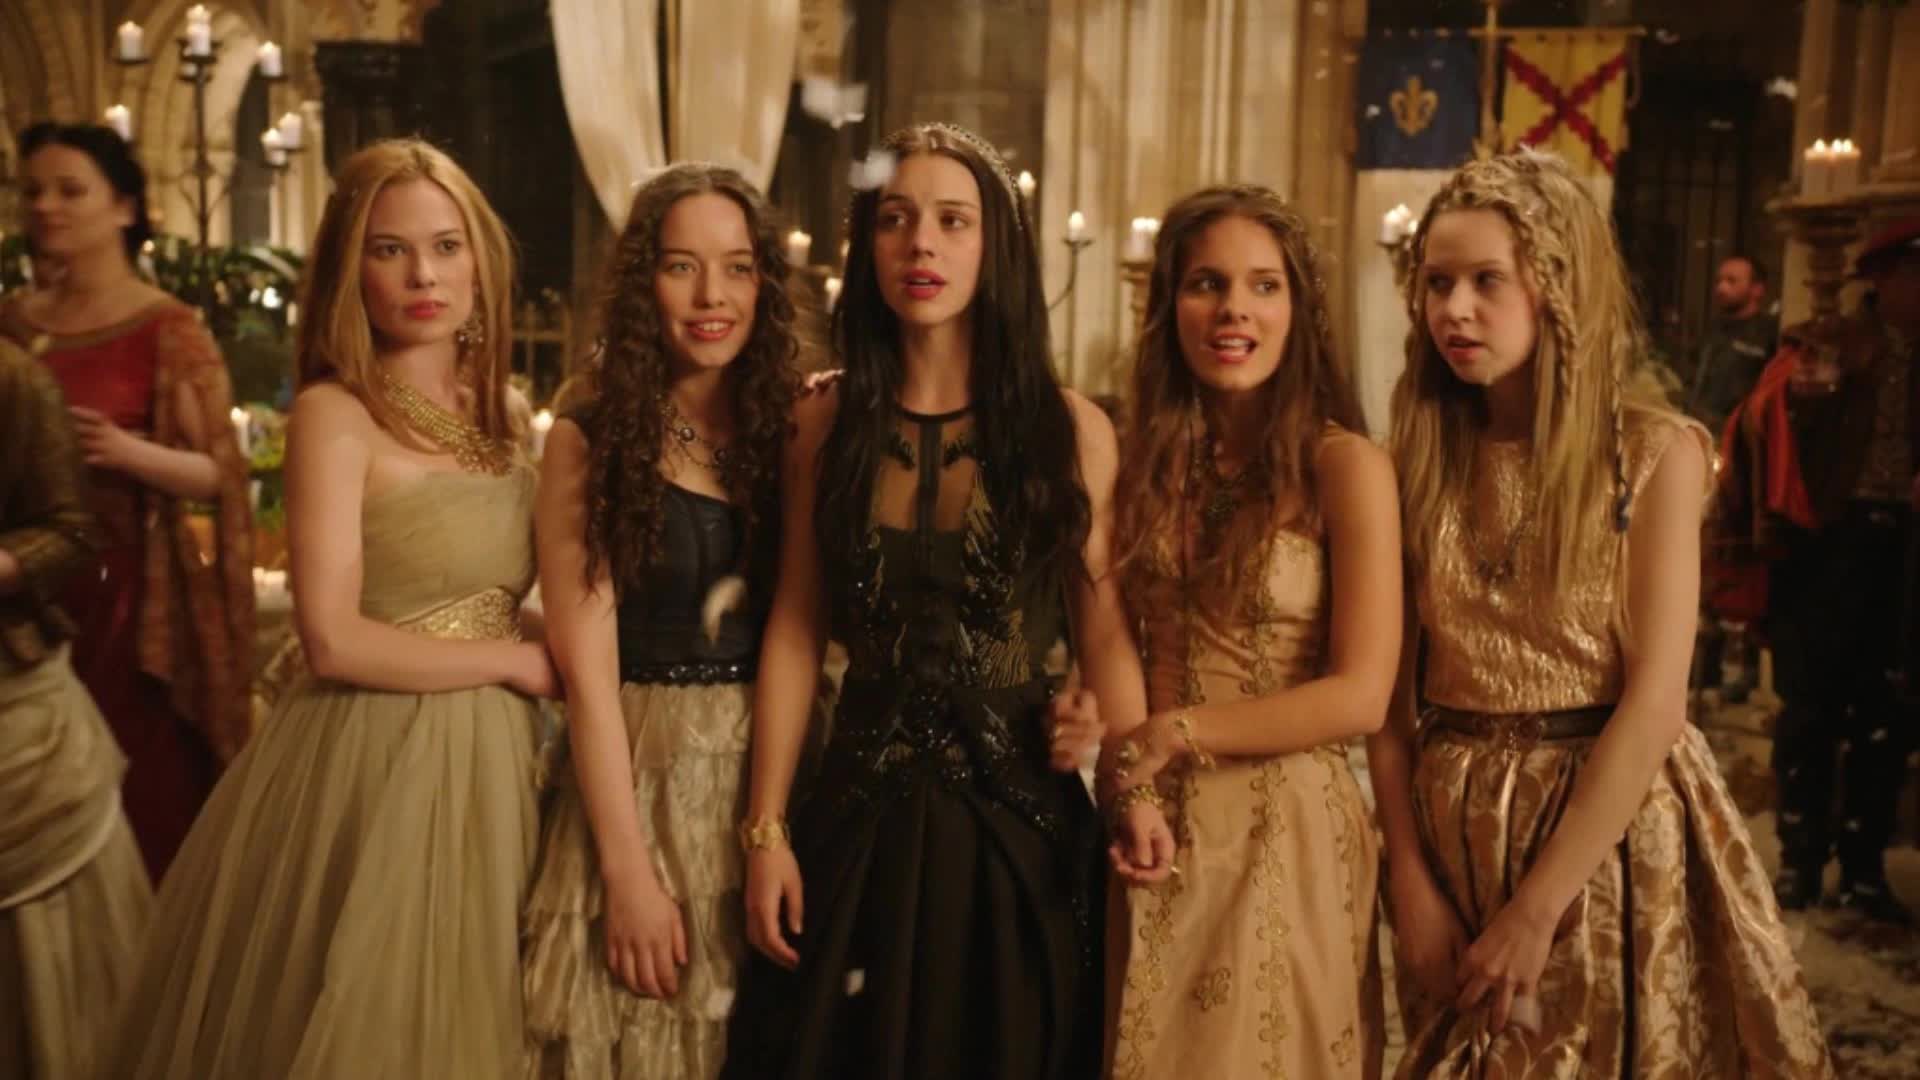 Five young woman in a medieval court all wear different expressions of emotion as they gather together.